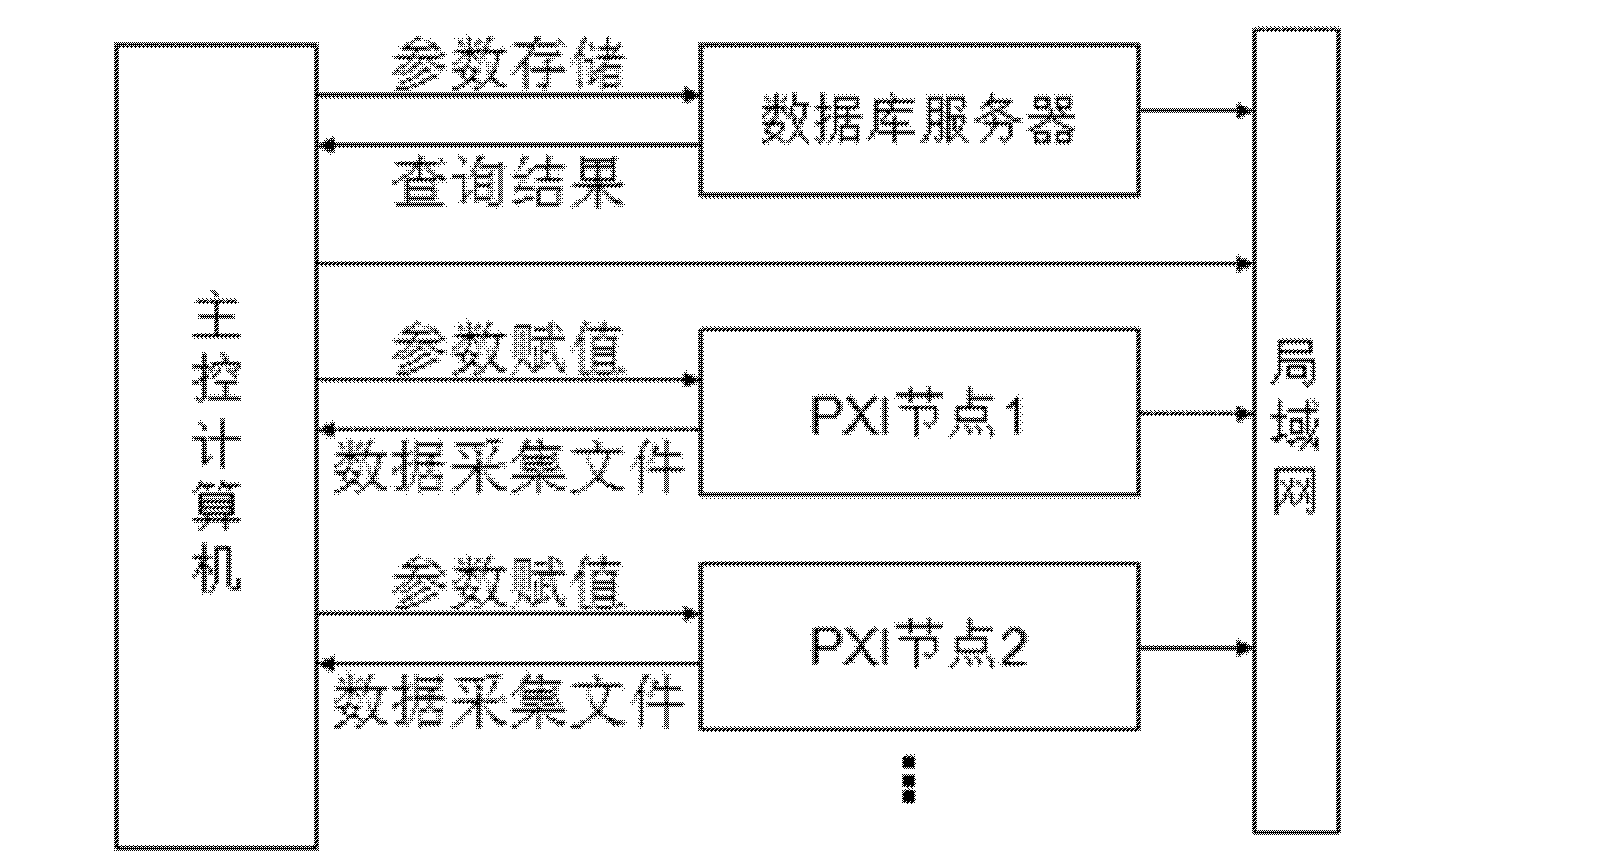 EAST central timing system based on PXI (extension for instrumentation)